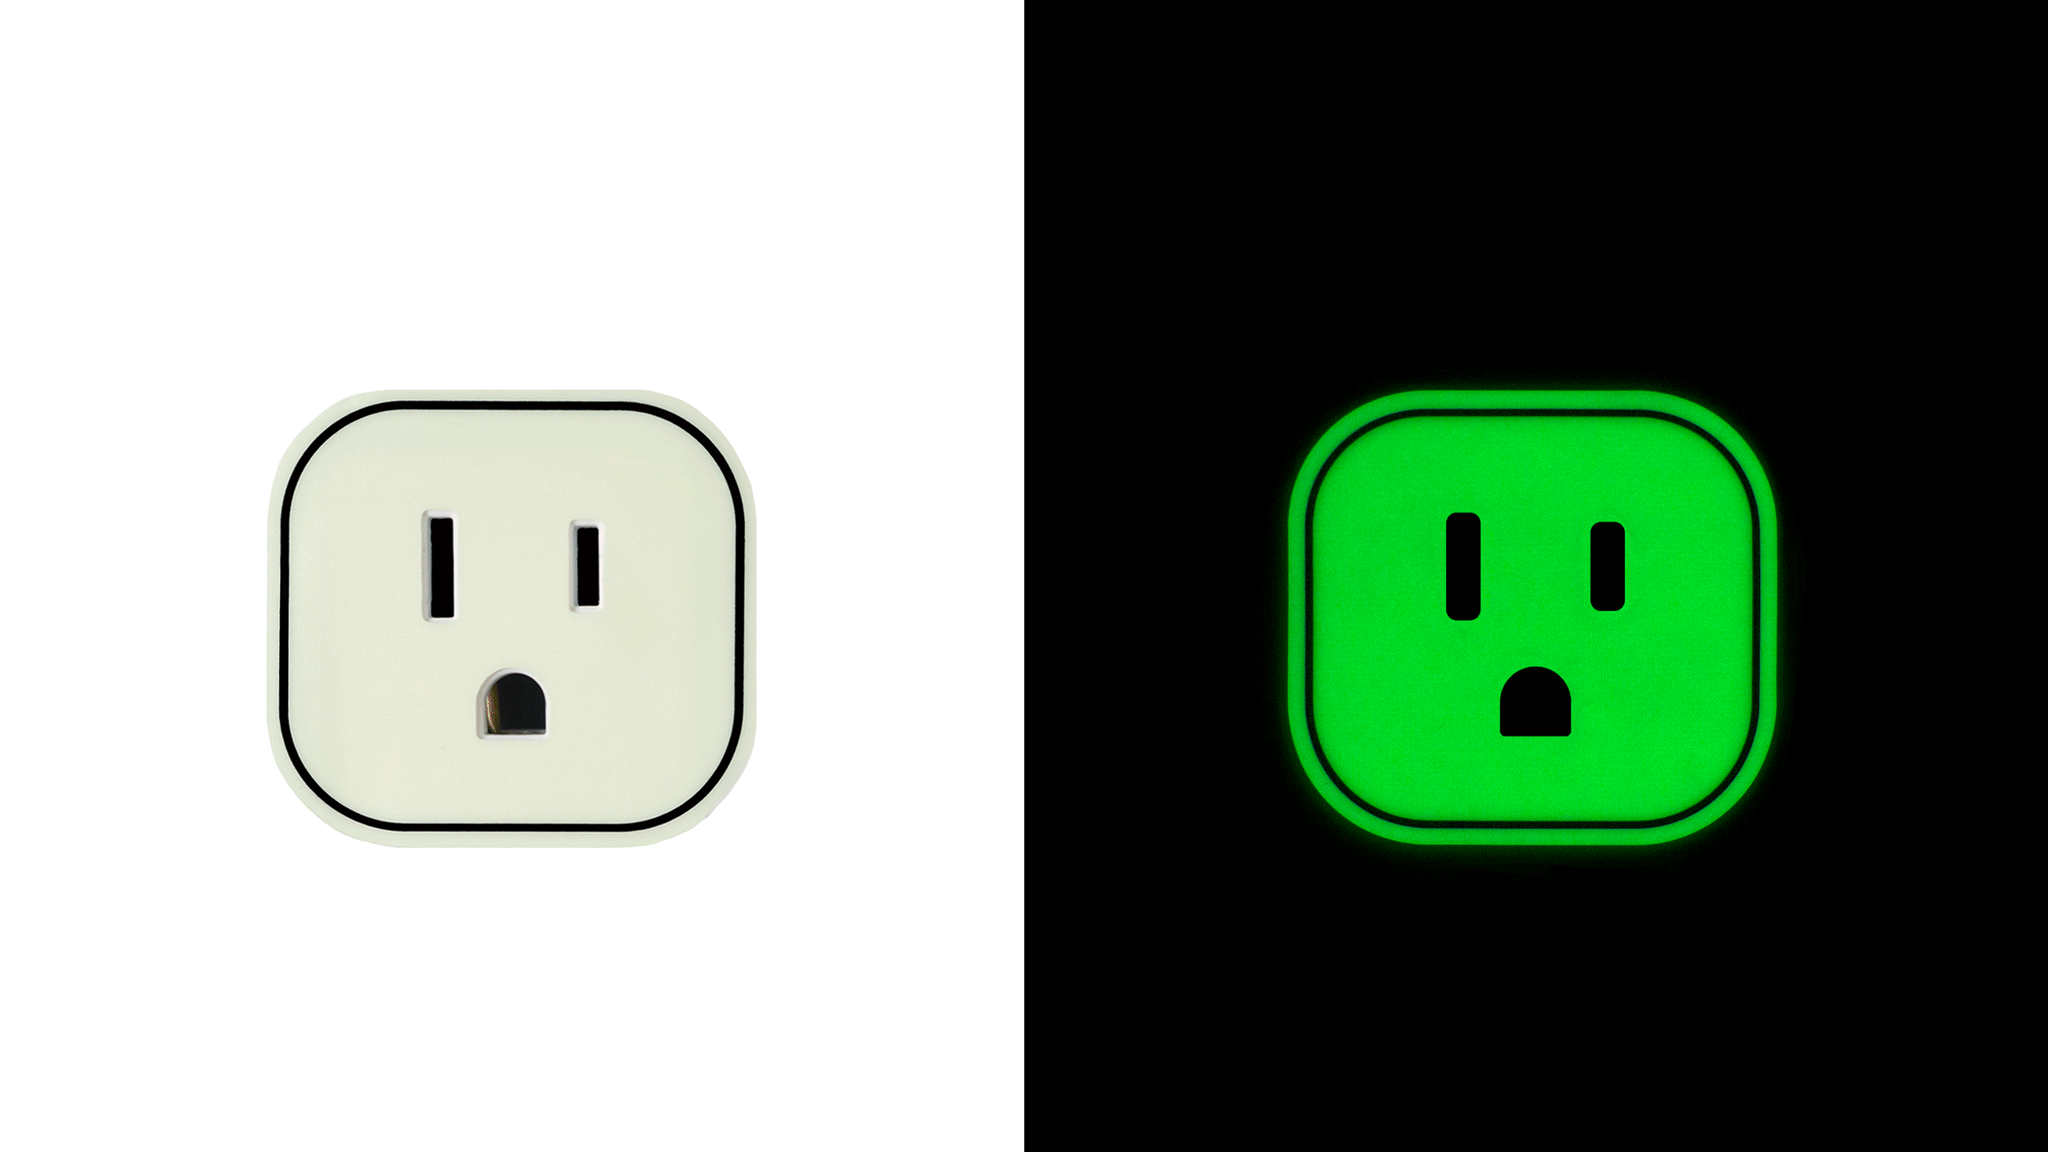 I Made Glow-In-The-Dark Outlet Stickers!